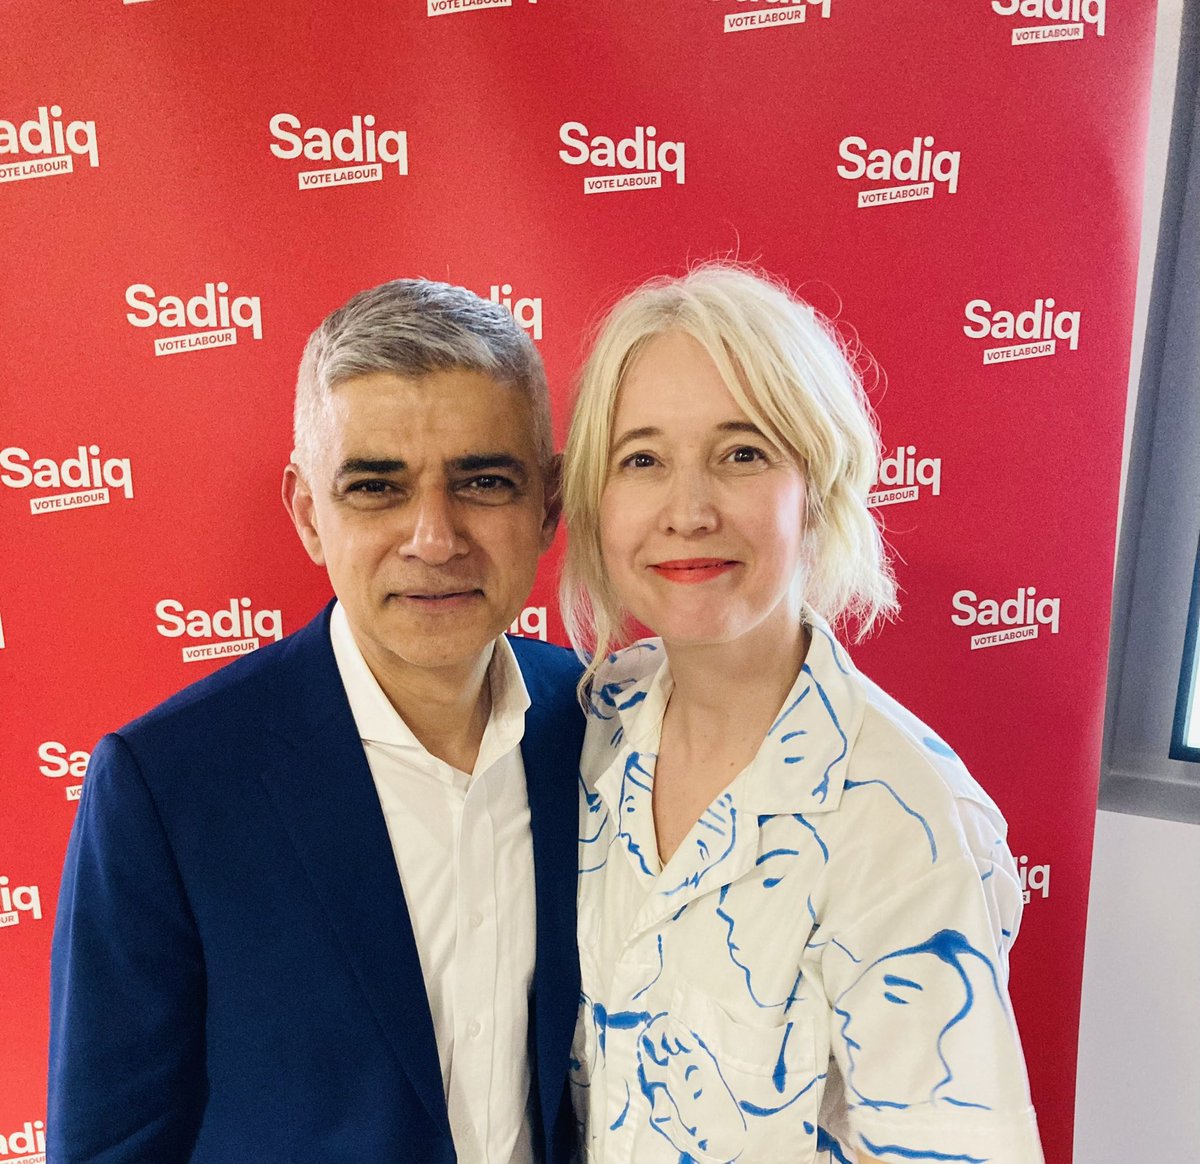 A great result for London! Congratulations @SadiqKhan ✨ A positive vision won over a dystopian one. ✨Hope over fear ✨Diversity over division ✨Clean air over climate denial ✨Culture for All over Culture wars Thank you London 🙏